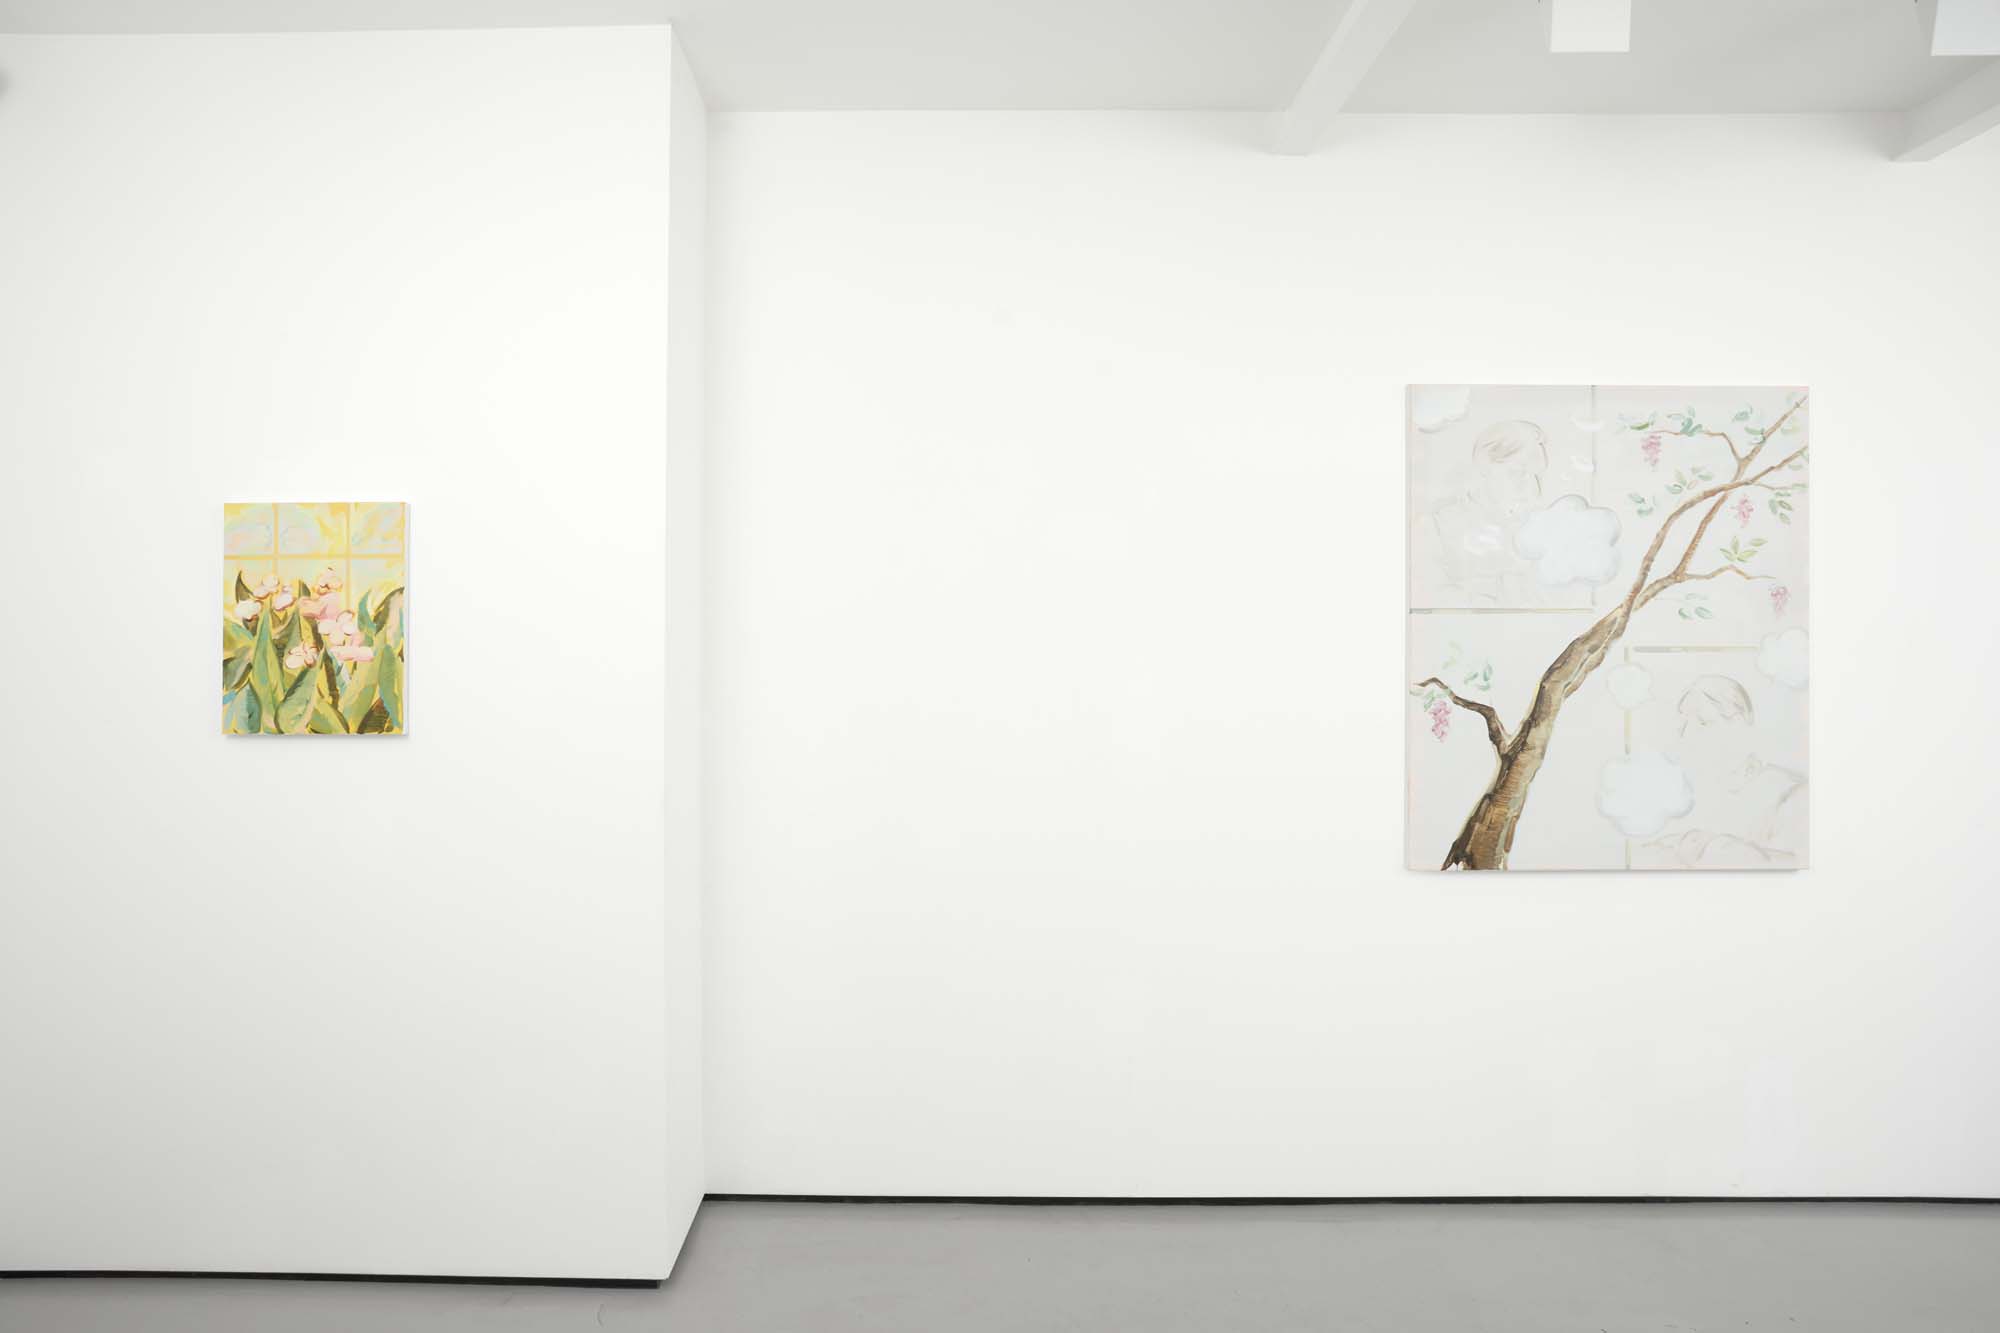 Installation image for Sooim Jeong: Summer Remains, at Workplace